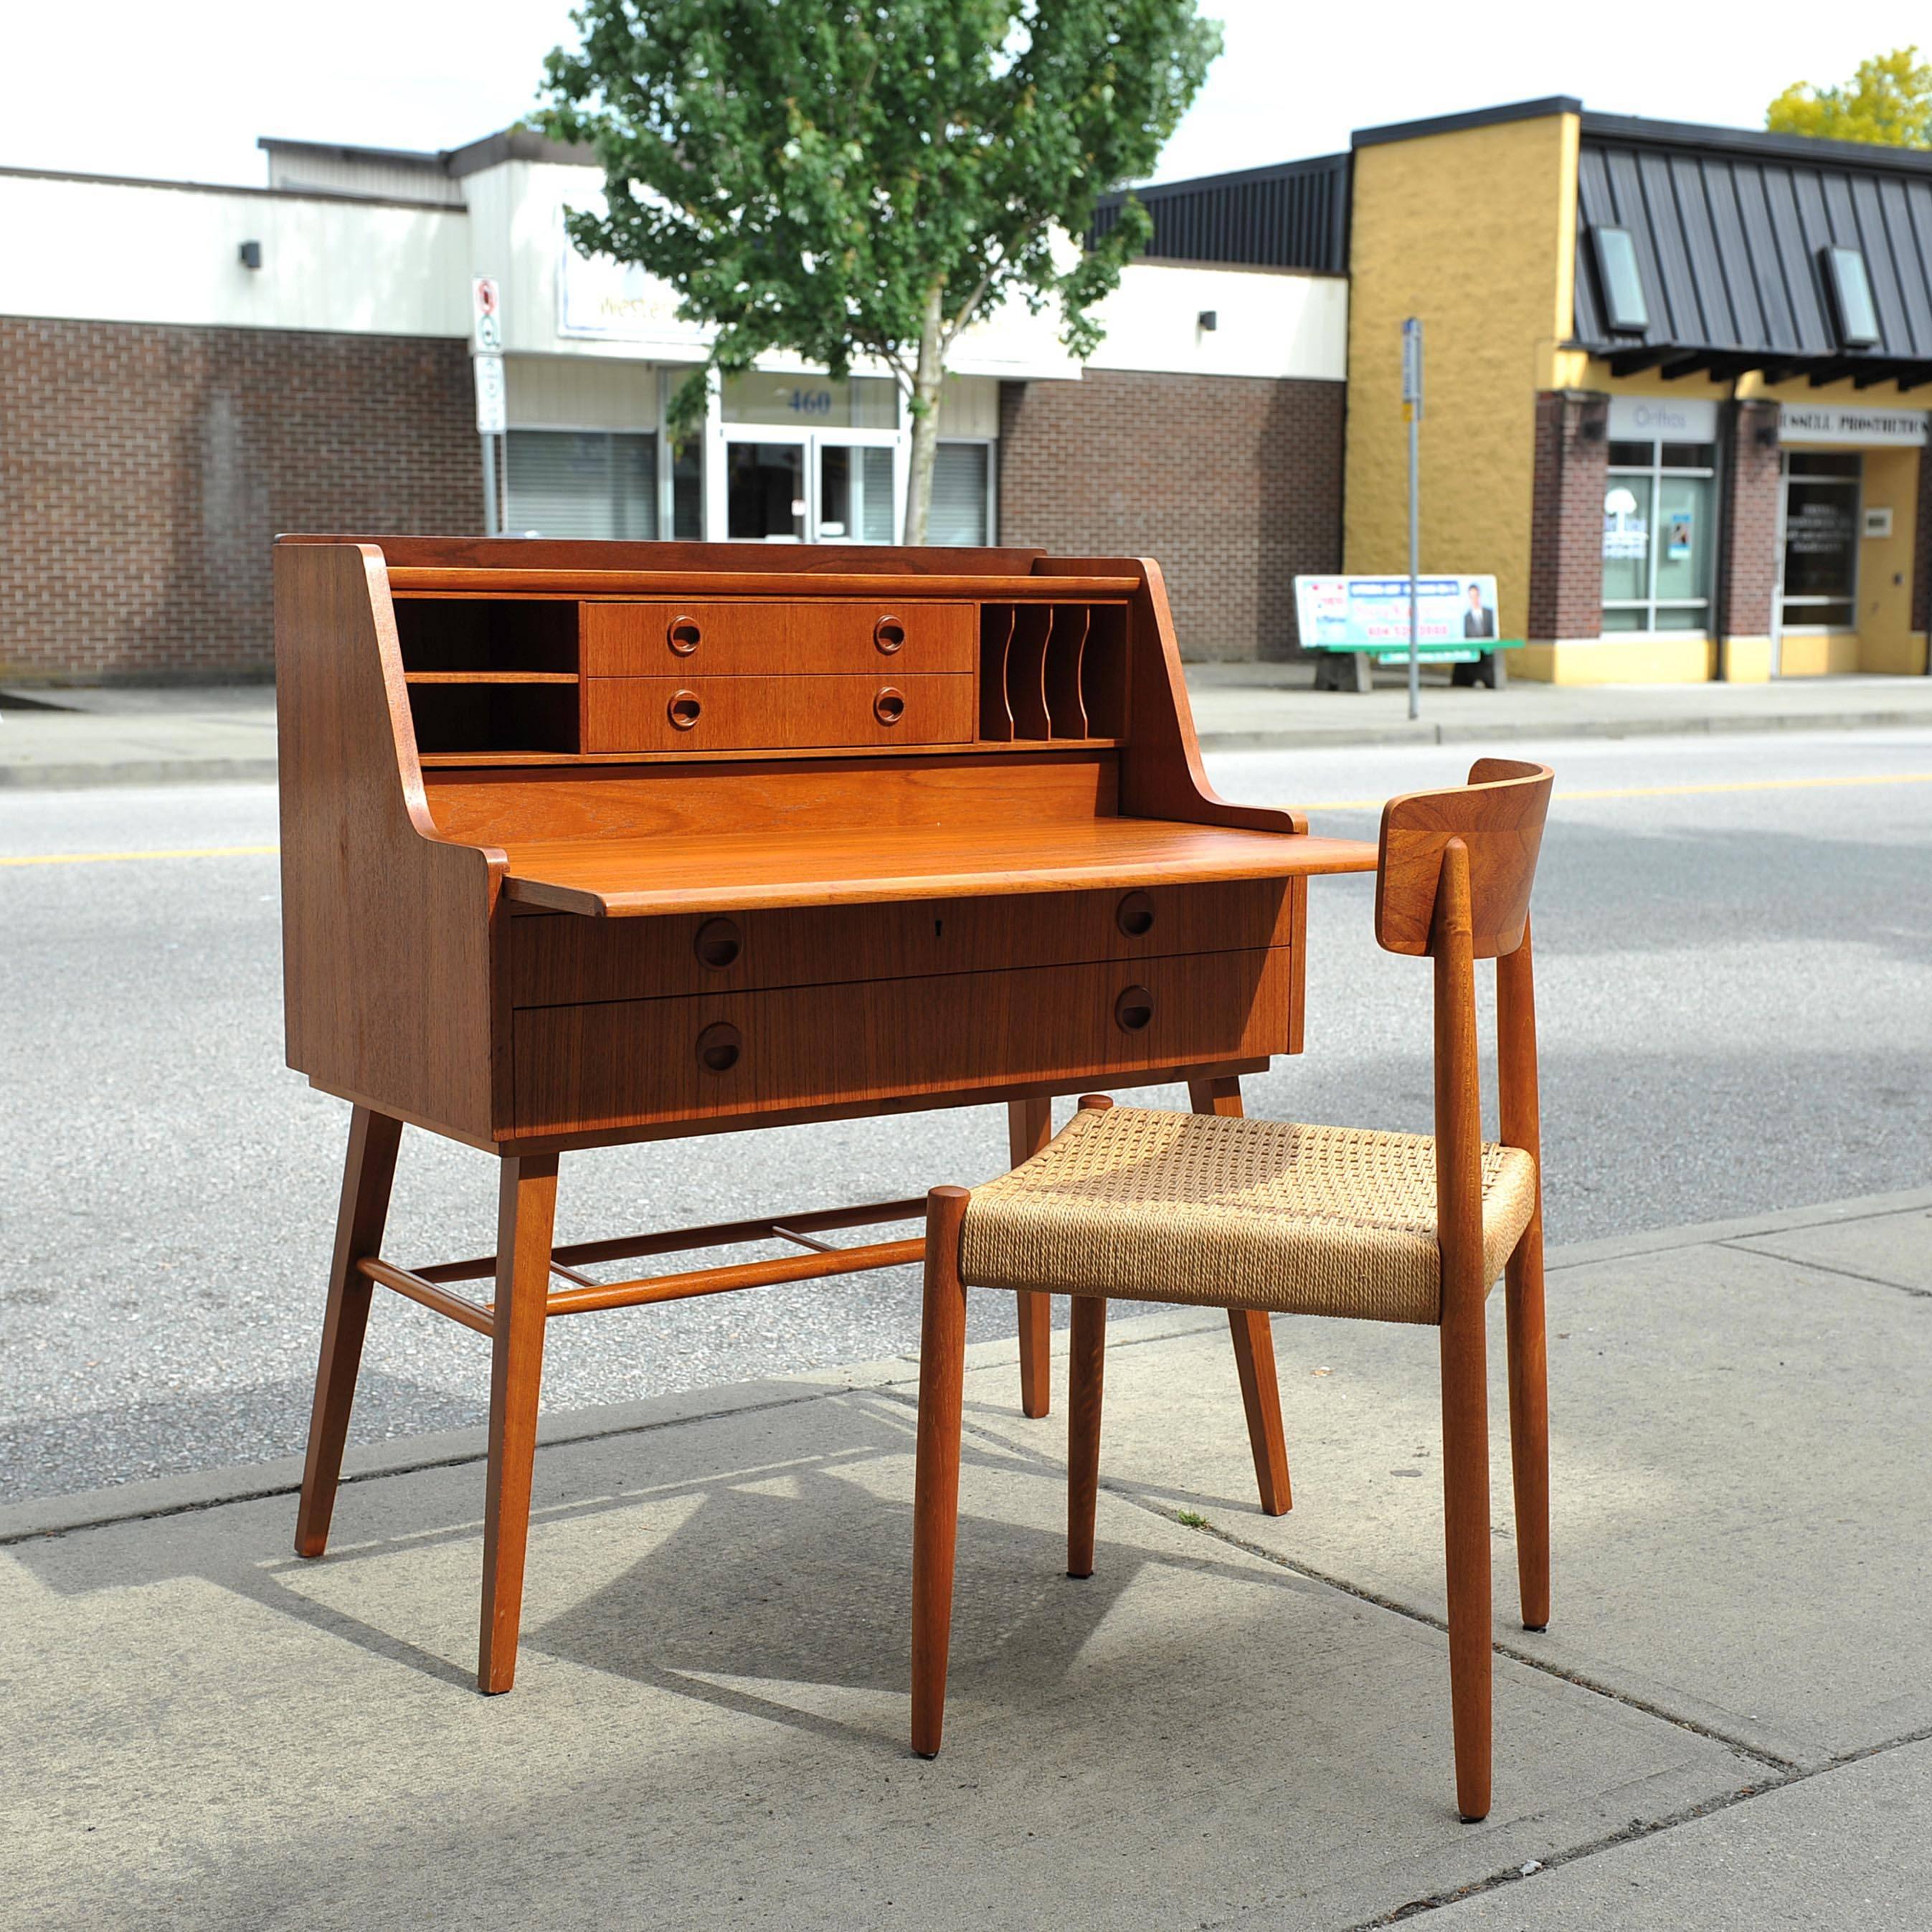 Swedish teak writing desk with matching chair. Very good vintage condition, compact design with plenty of storage. Would make a great vanity.